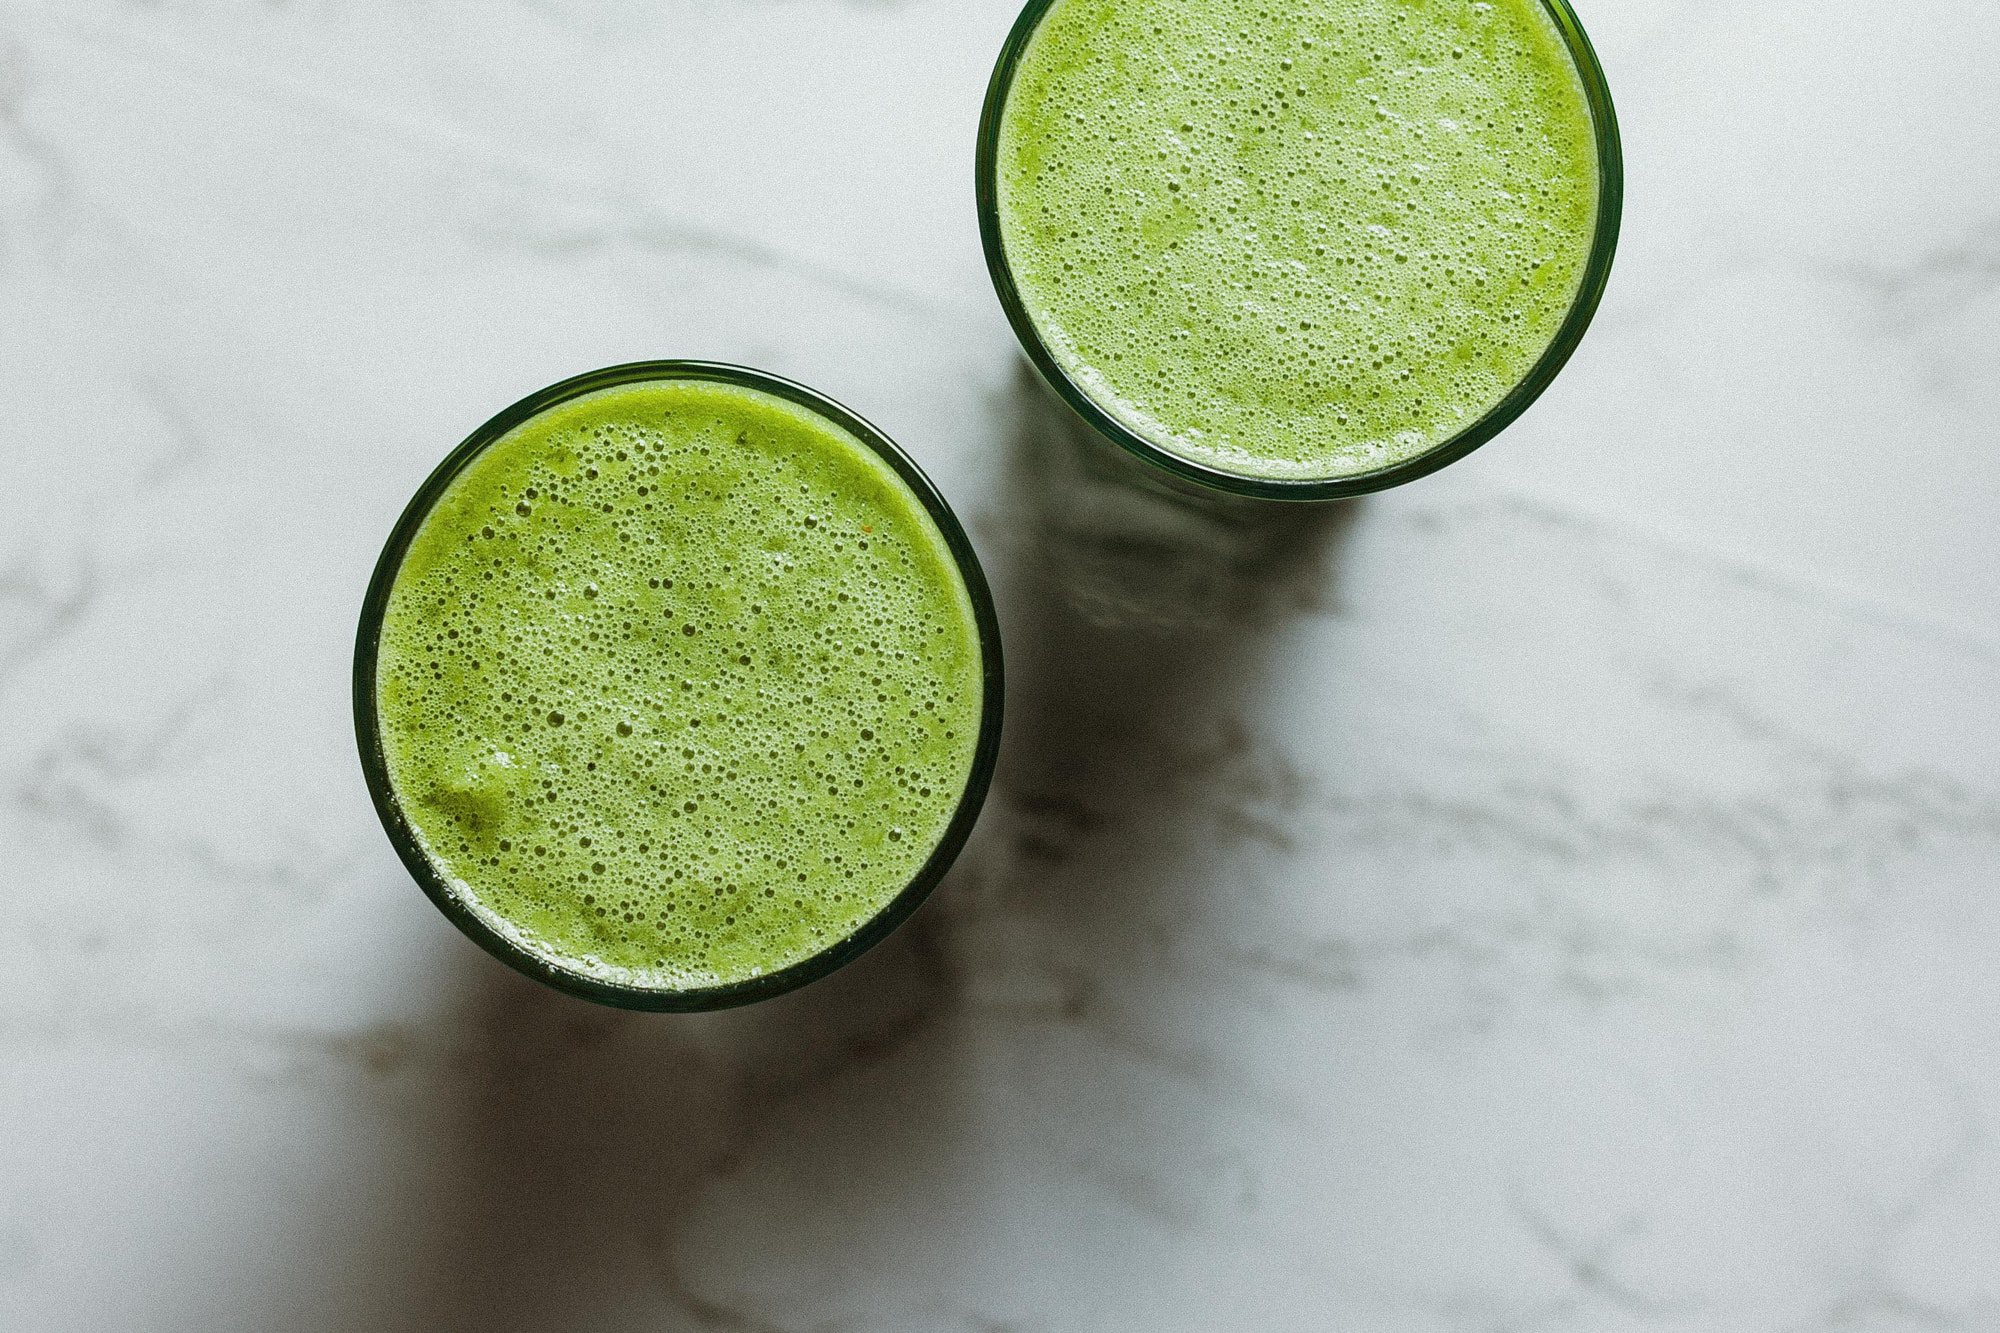 Green Smoothie: Getting Browned off with wasted time and cleanup? Me too!